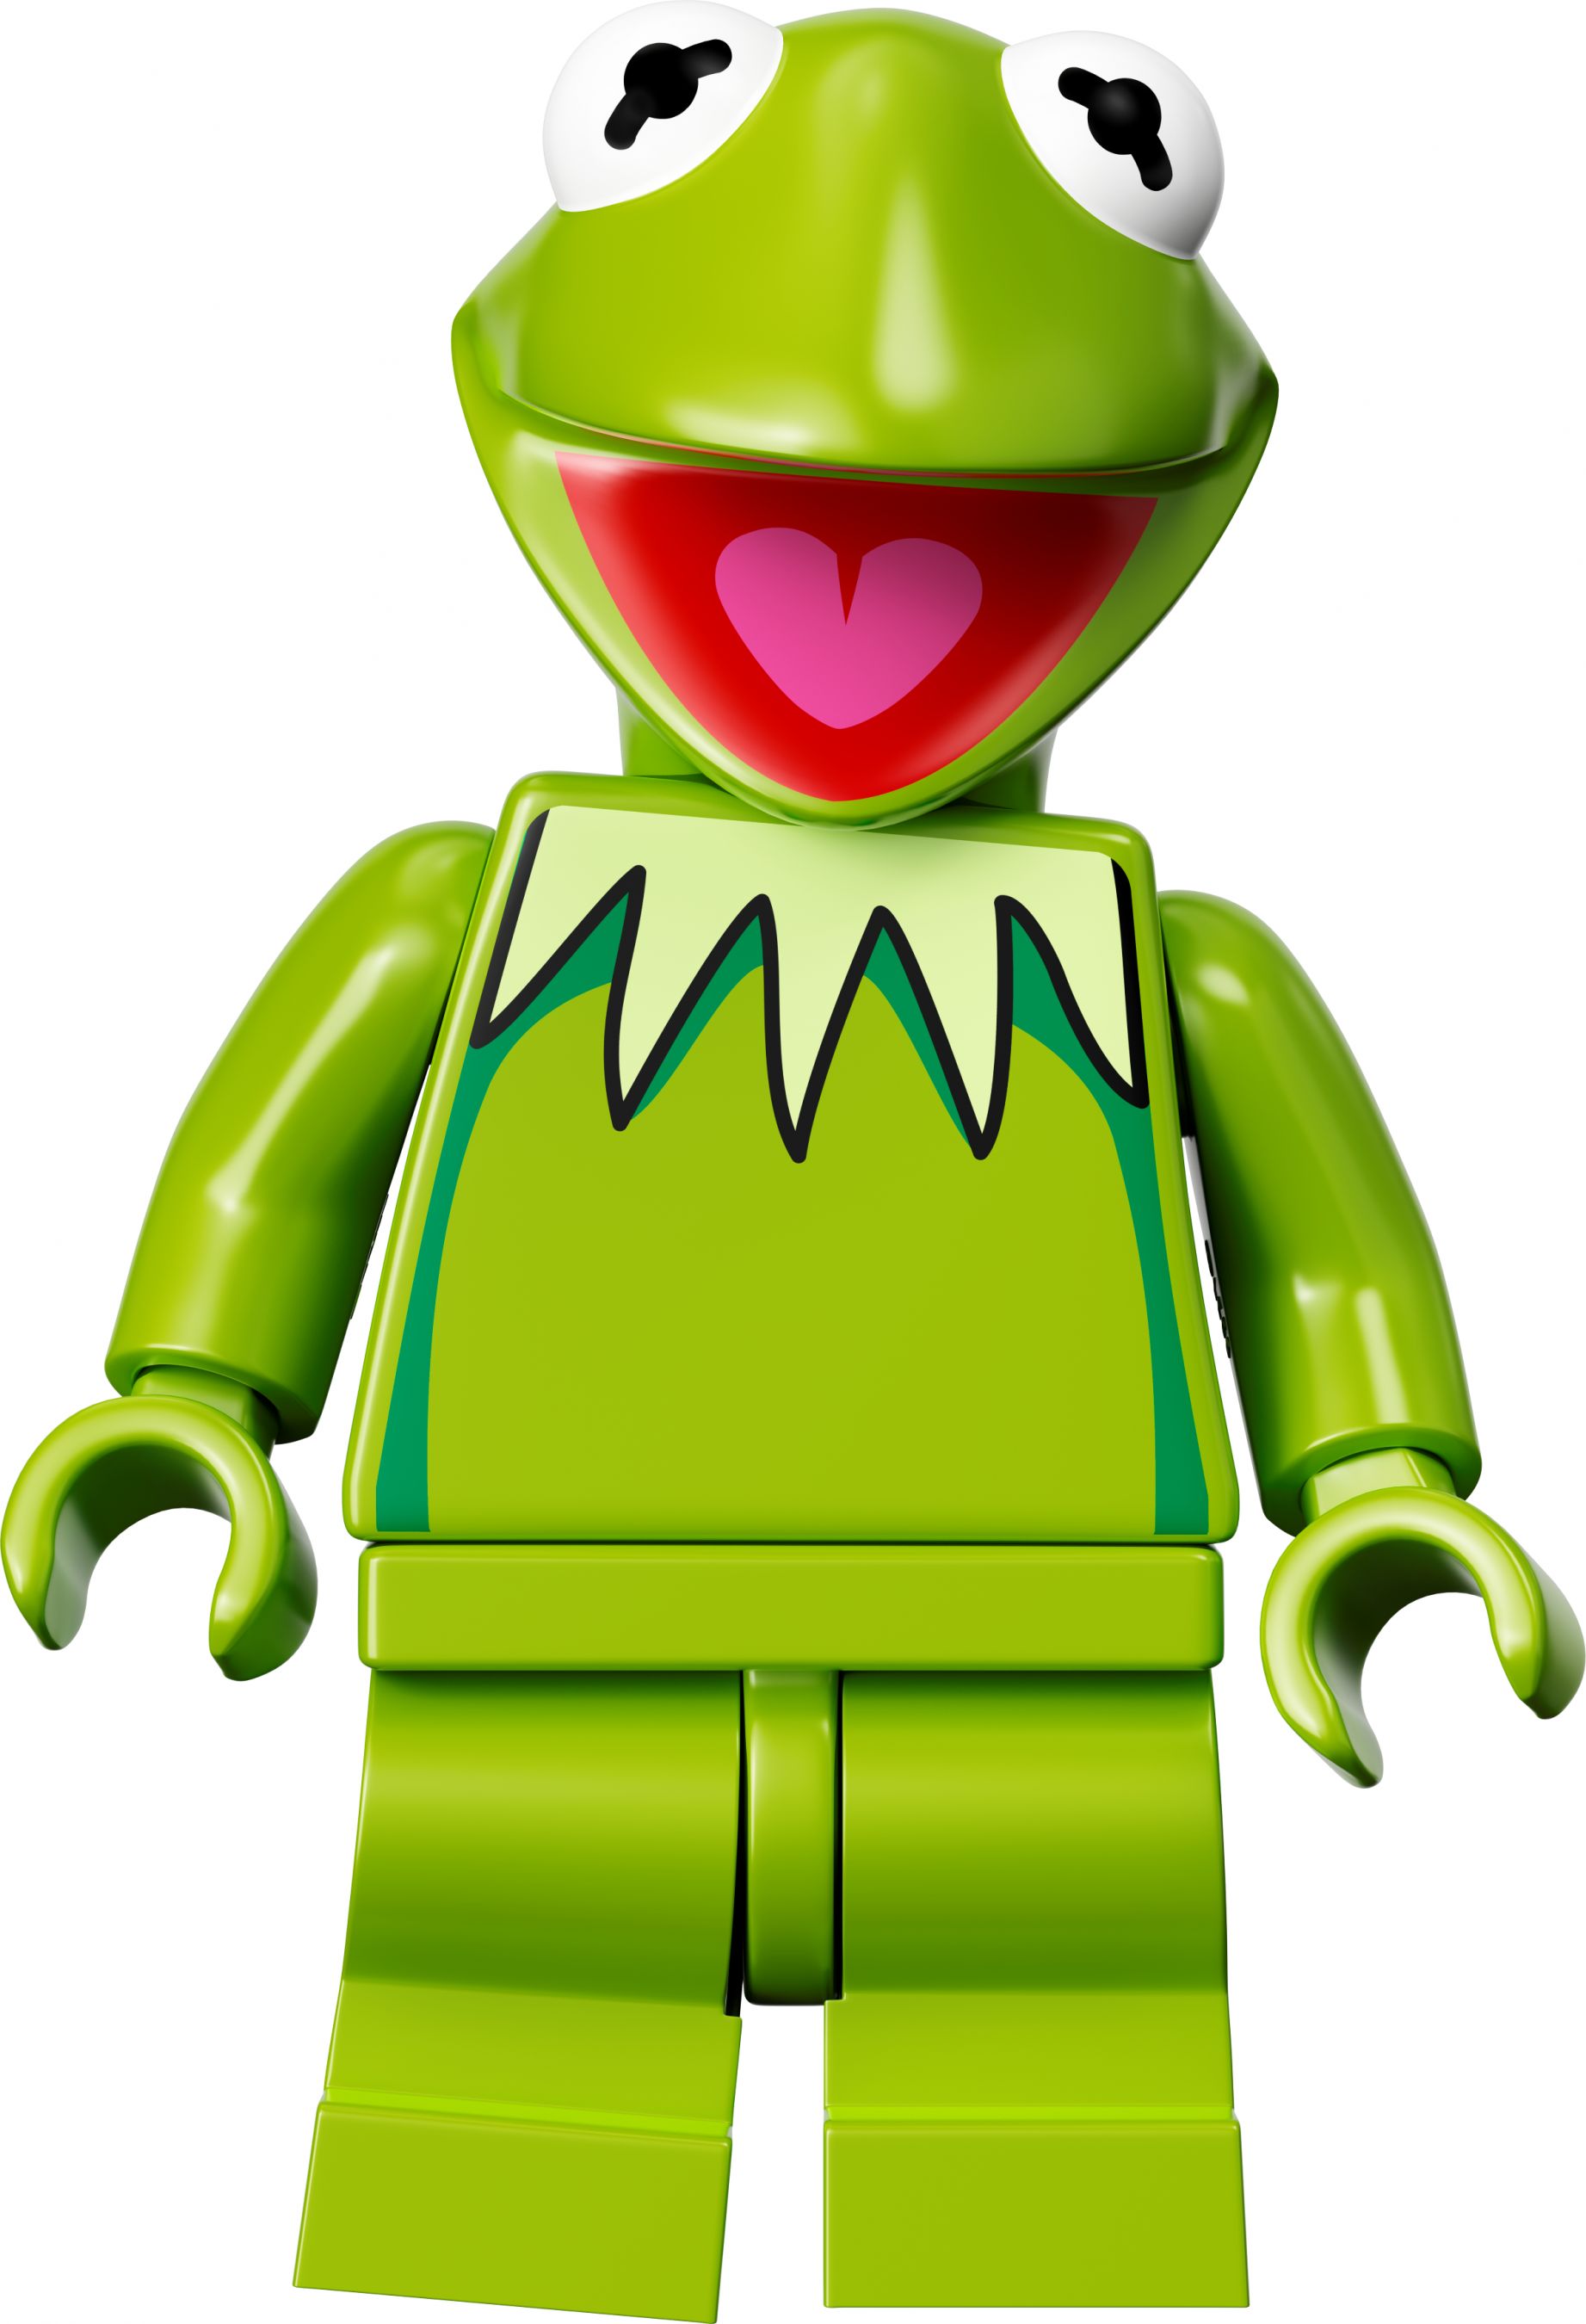 LEGO Collectable Minifigures 71033 Die Muppets LEGO_71033_alt5.jpg